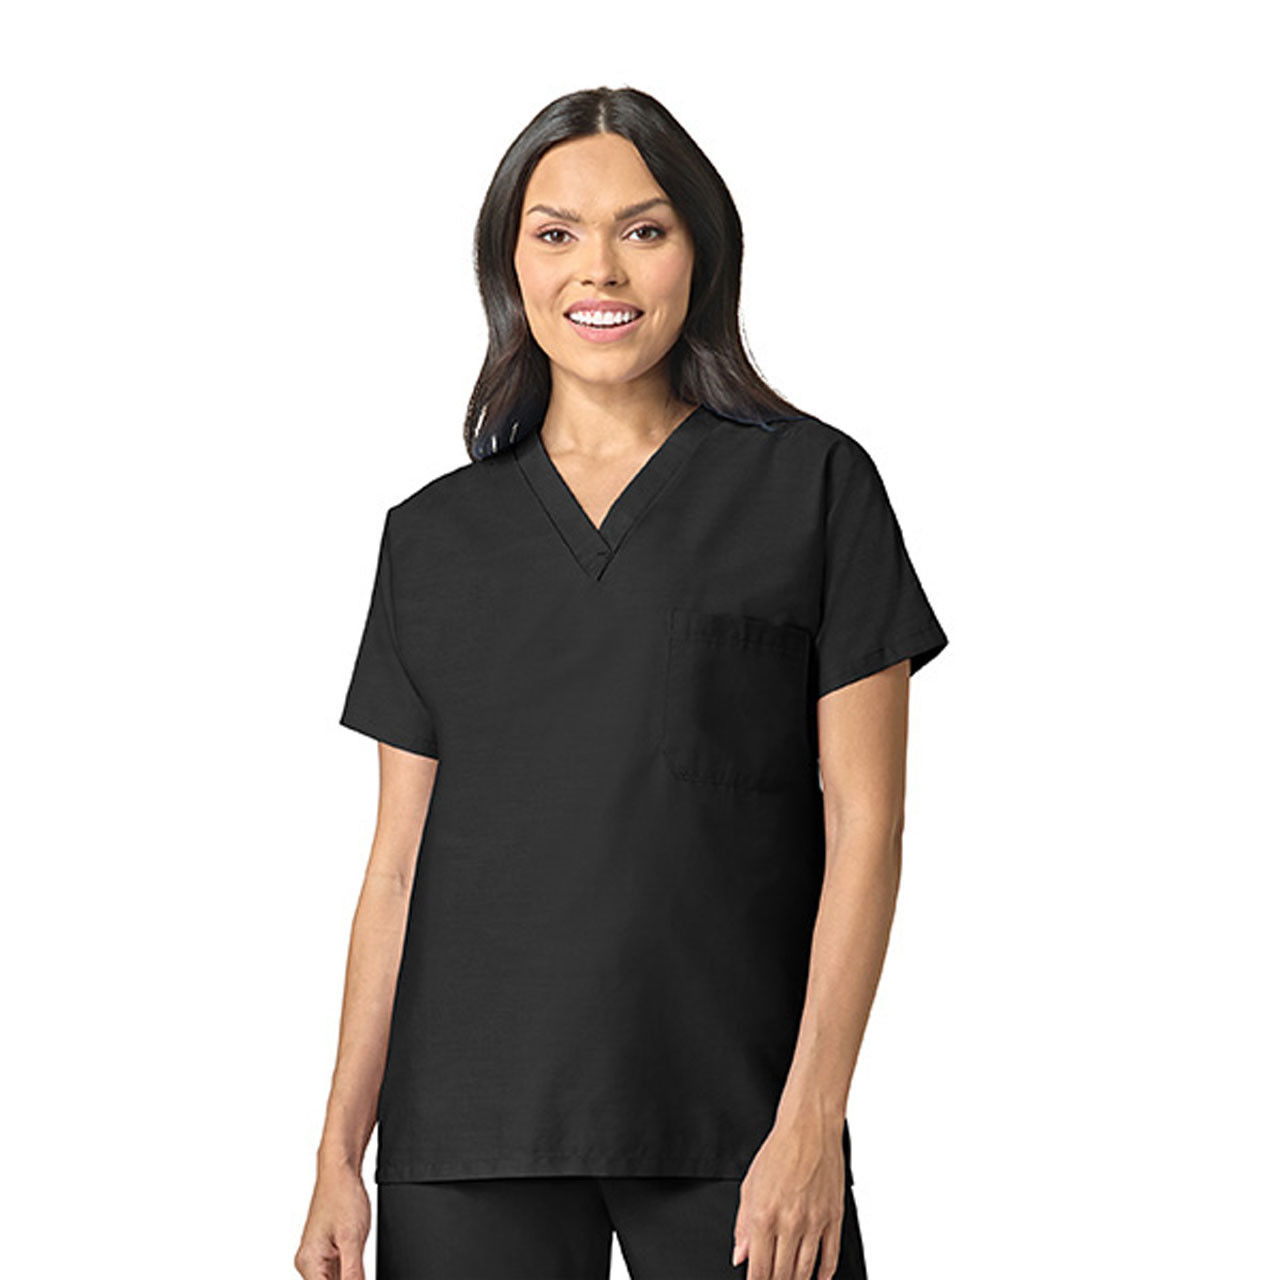 How many Black Scrub Tops come in a case?